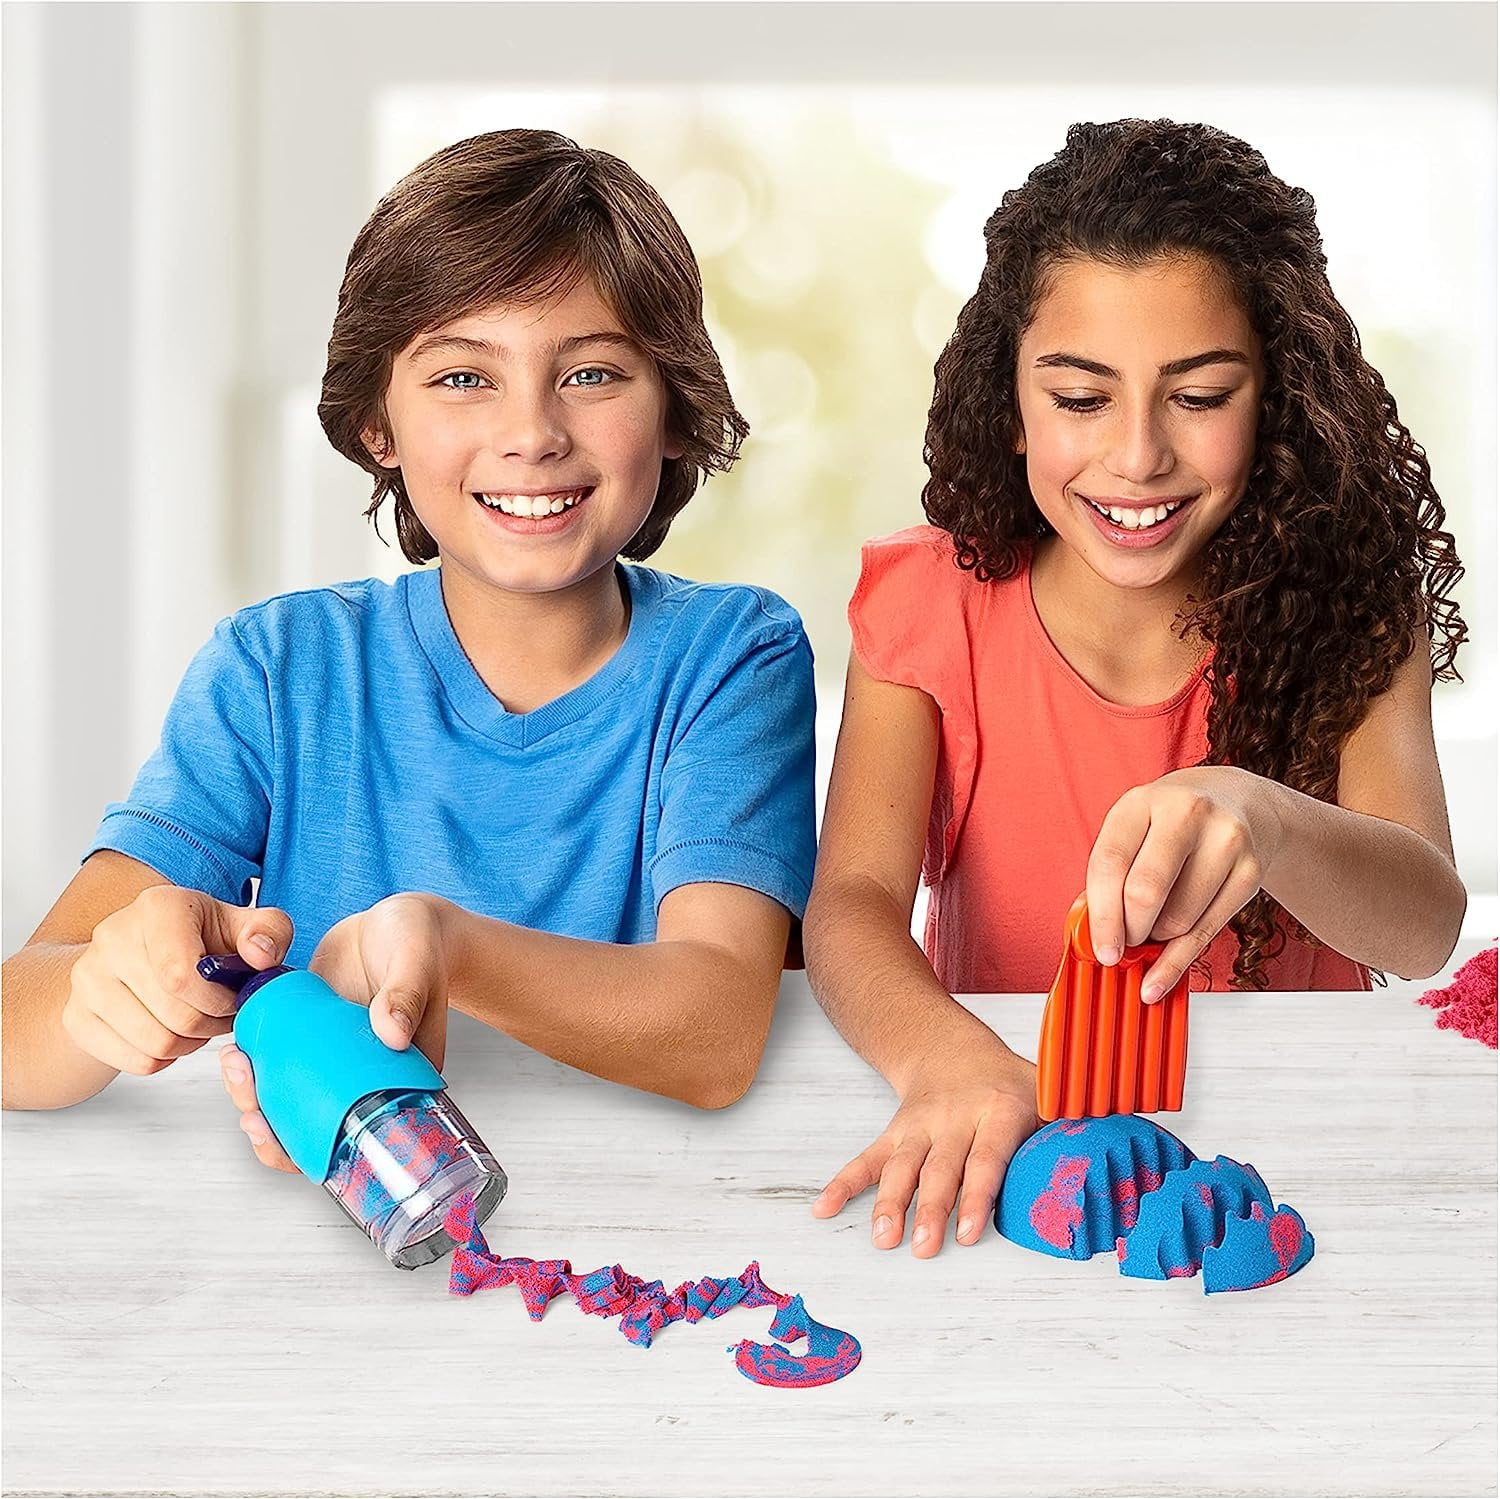 Kinetic Sand Sandisfying set - PLAYNOW! Toys and Games